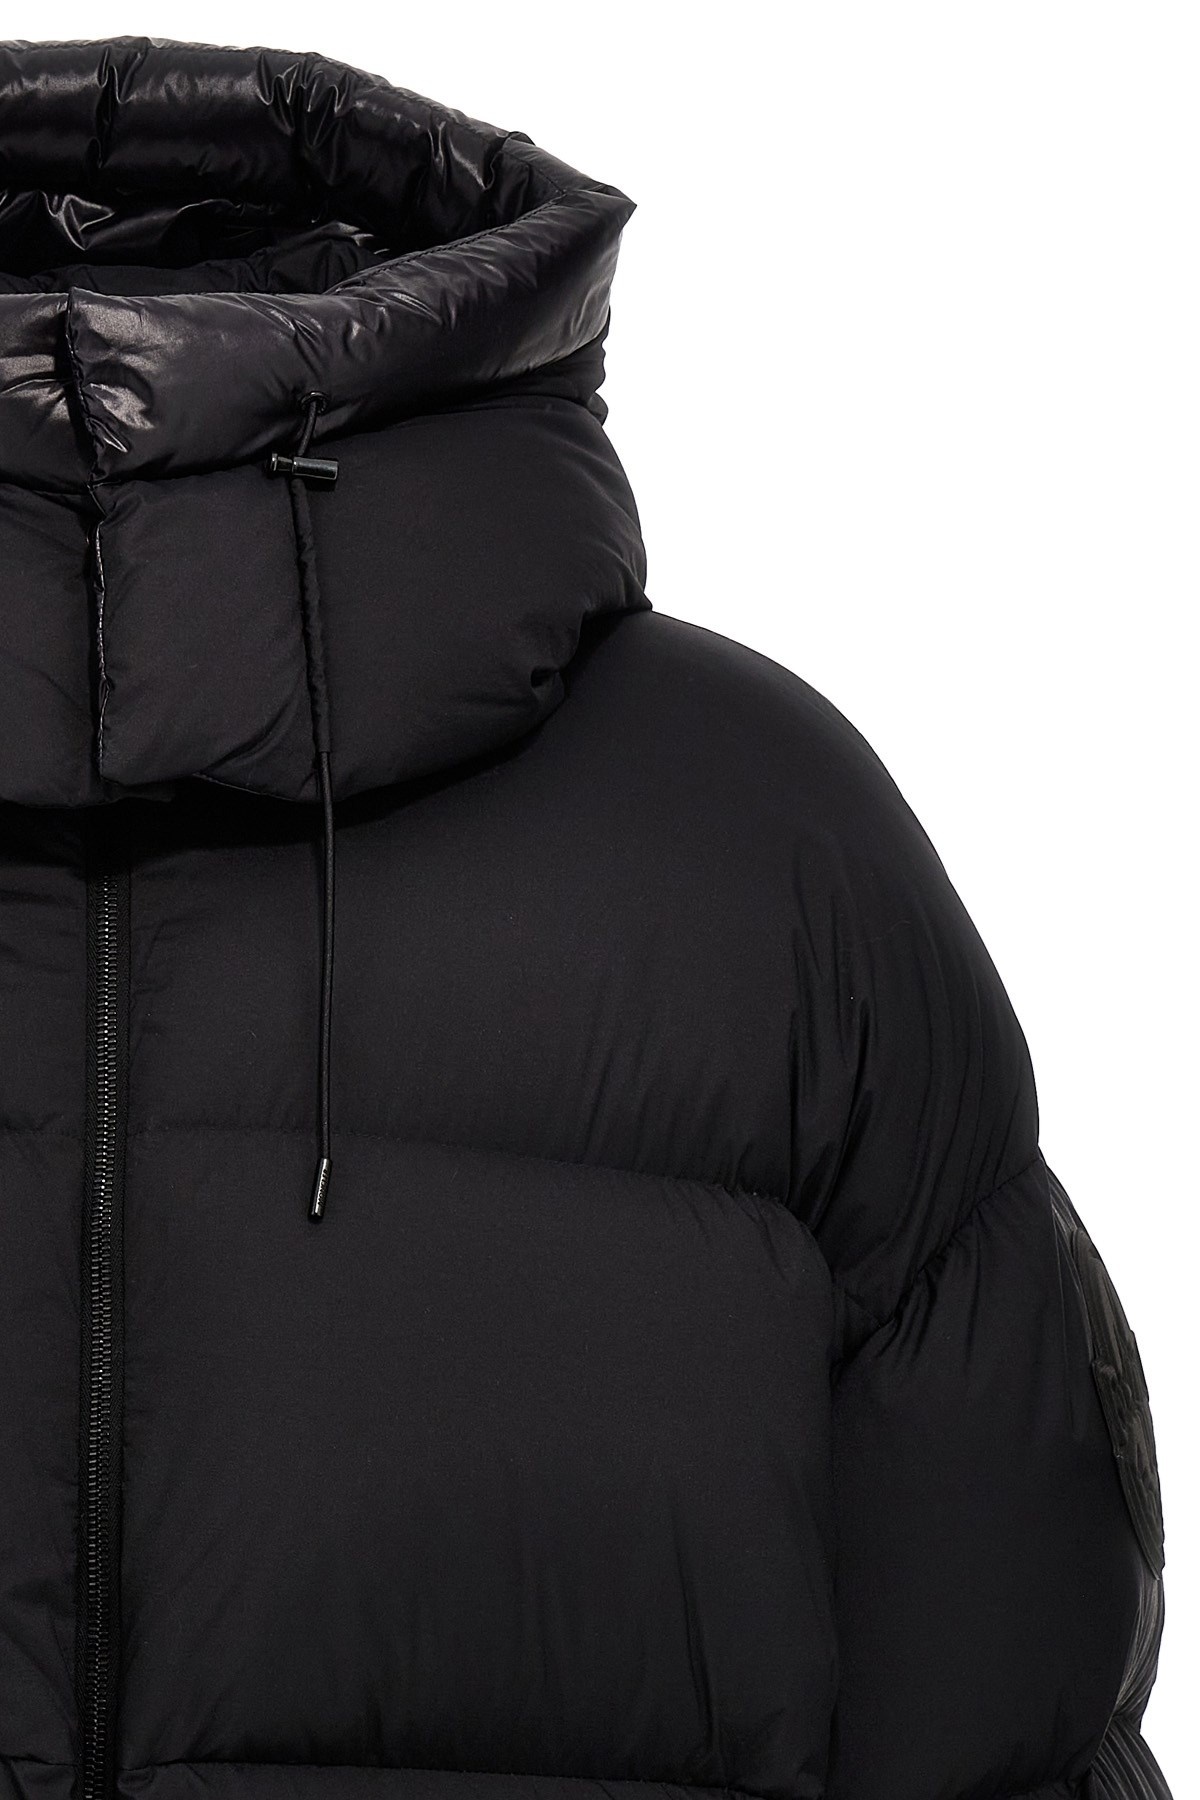 Moncler Genius Roc Nation by Jay-Z down jacket - 4